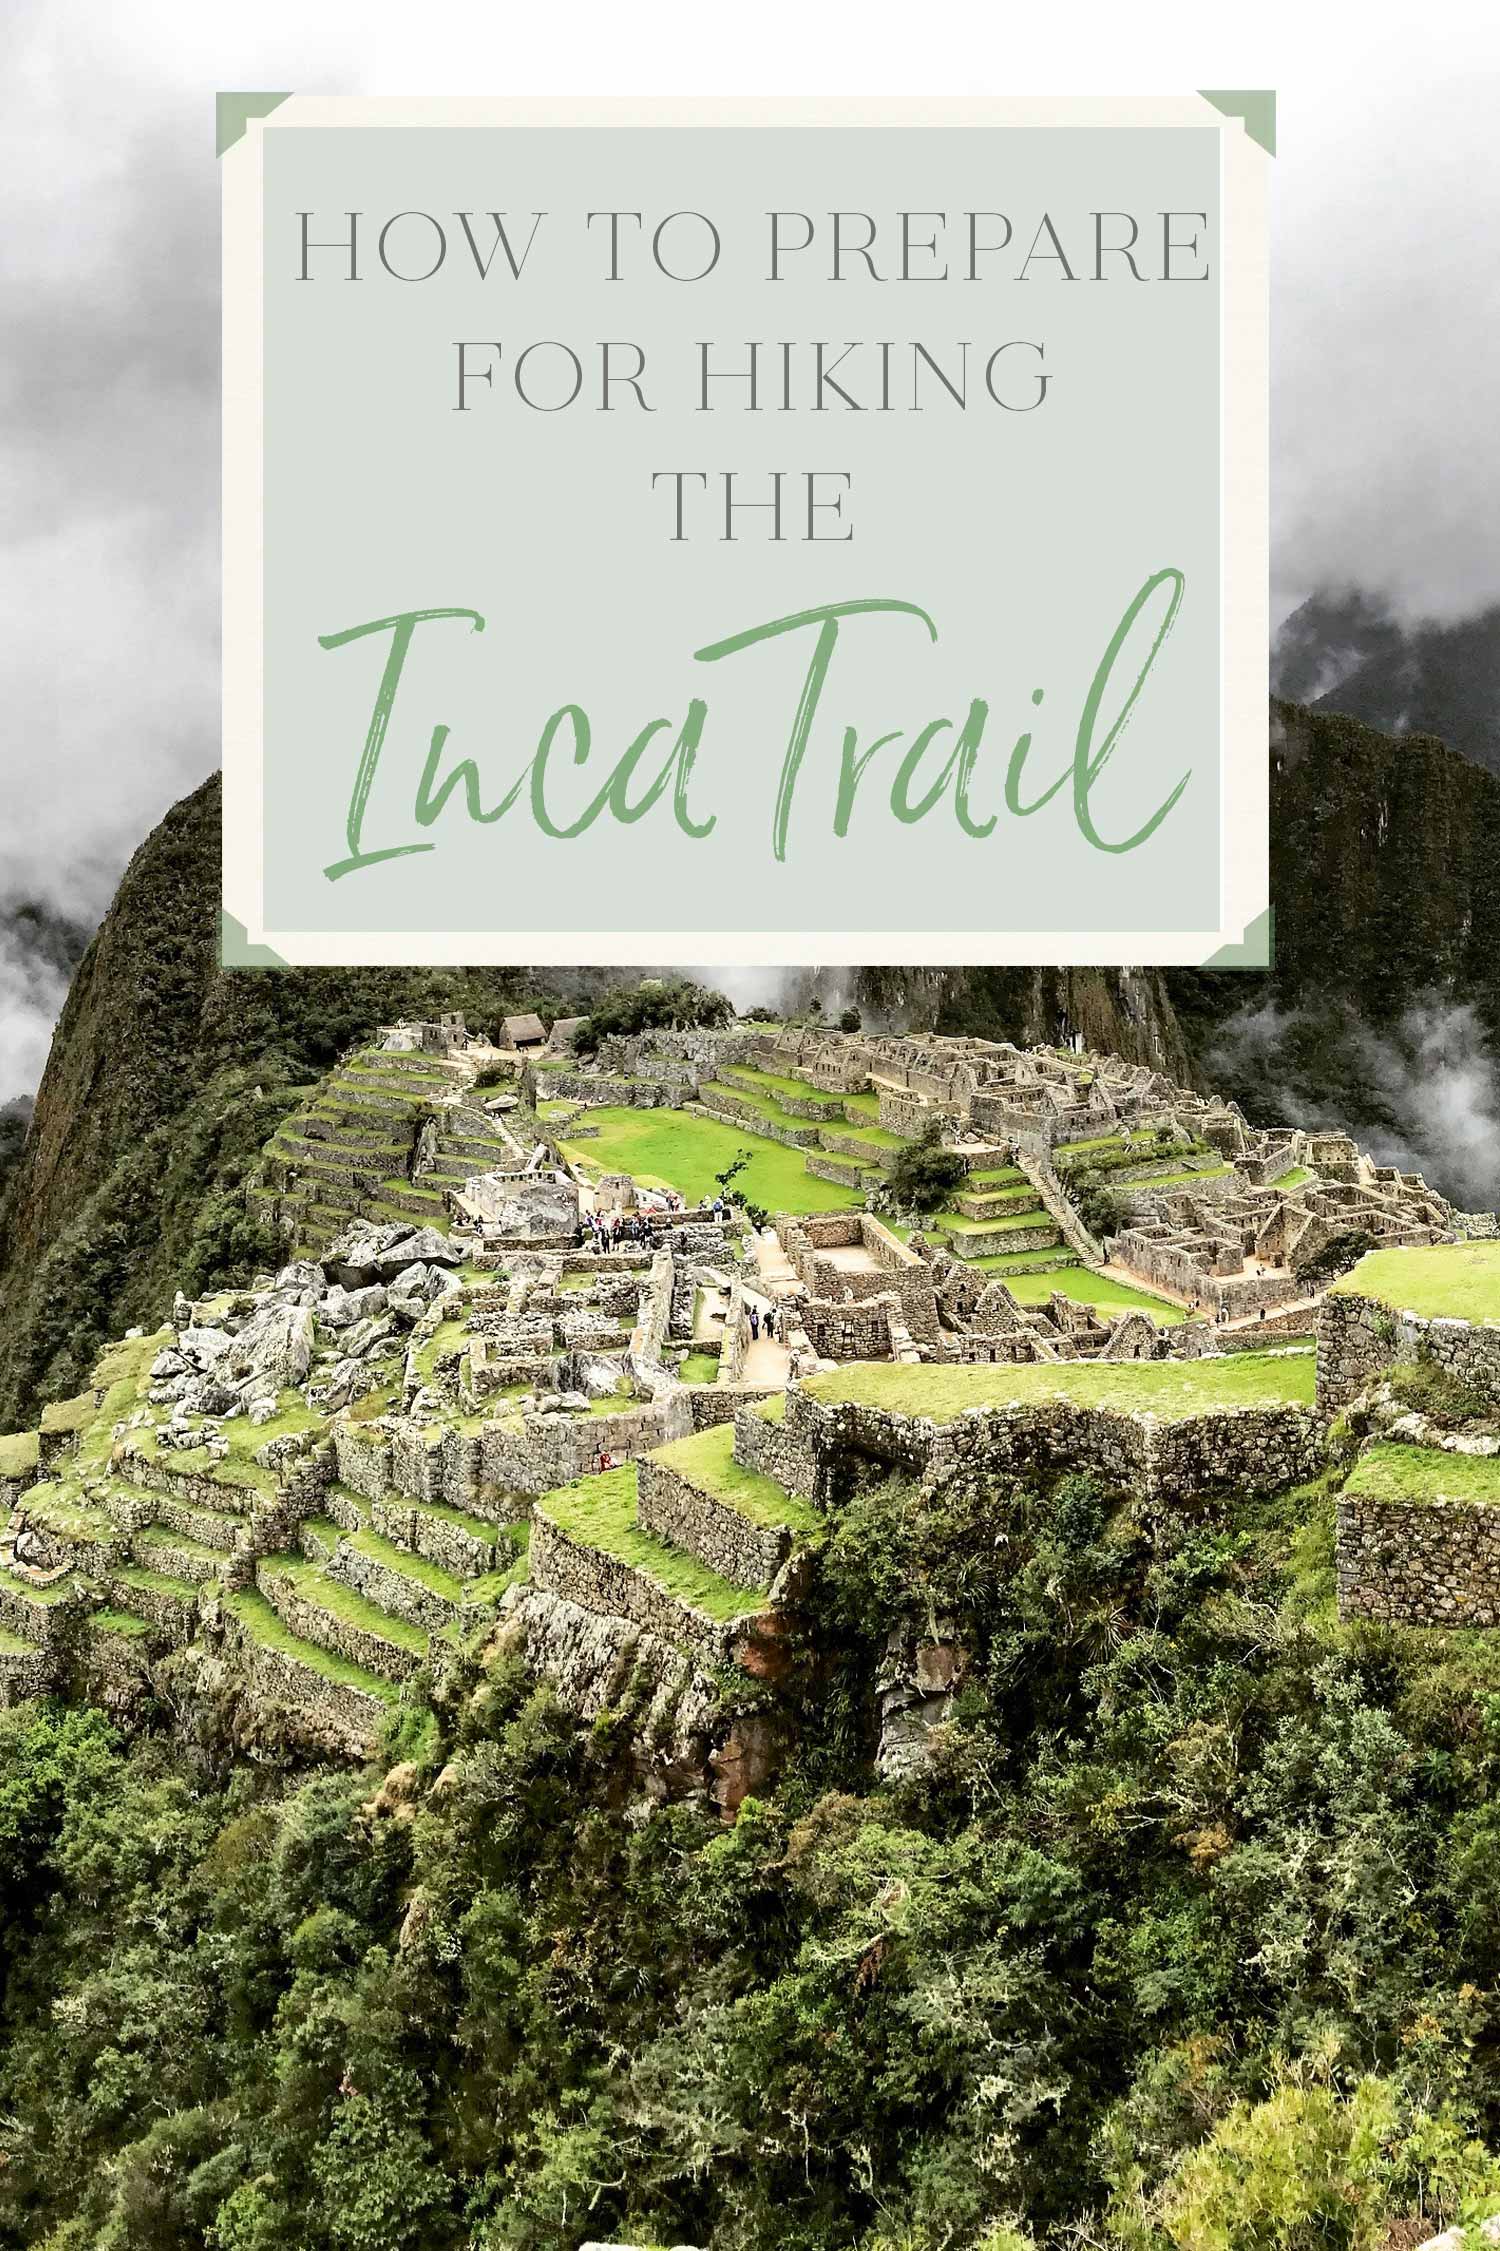 How to prepare for hiking the inca trail